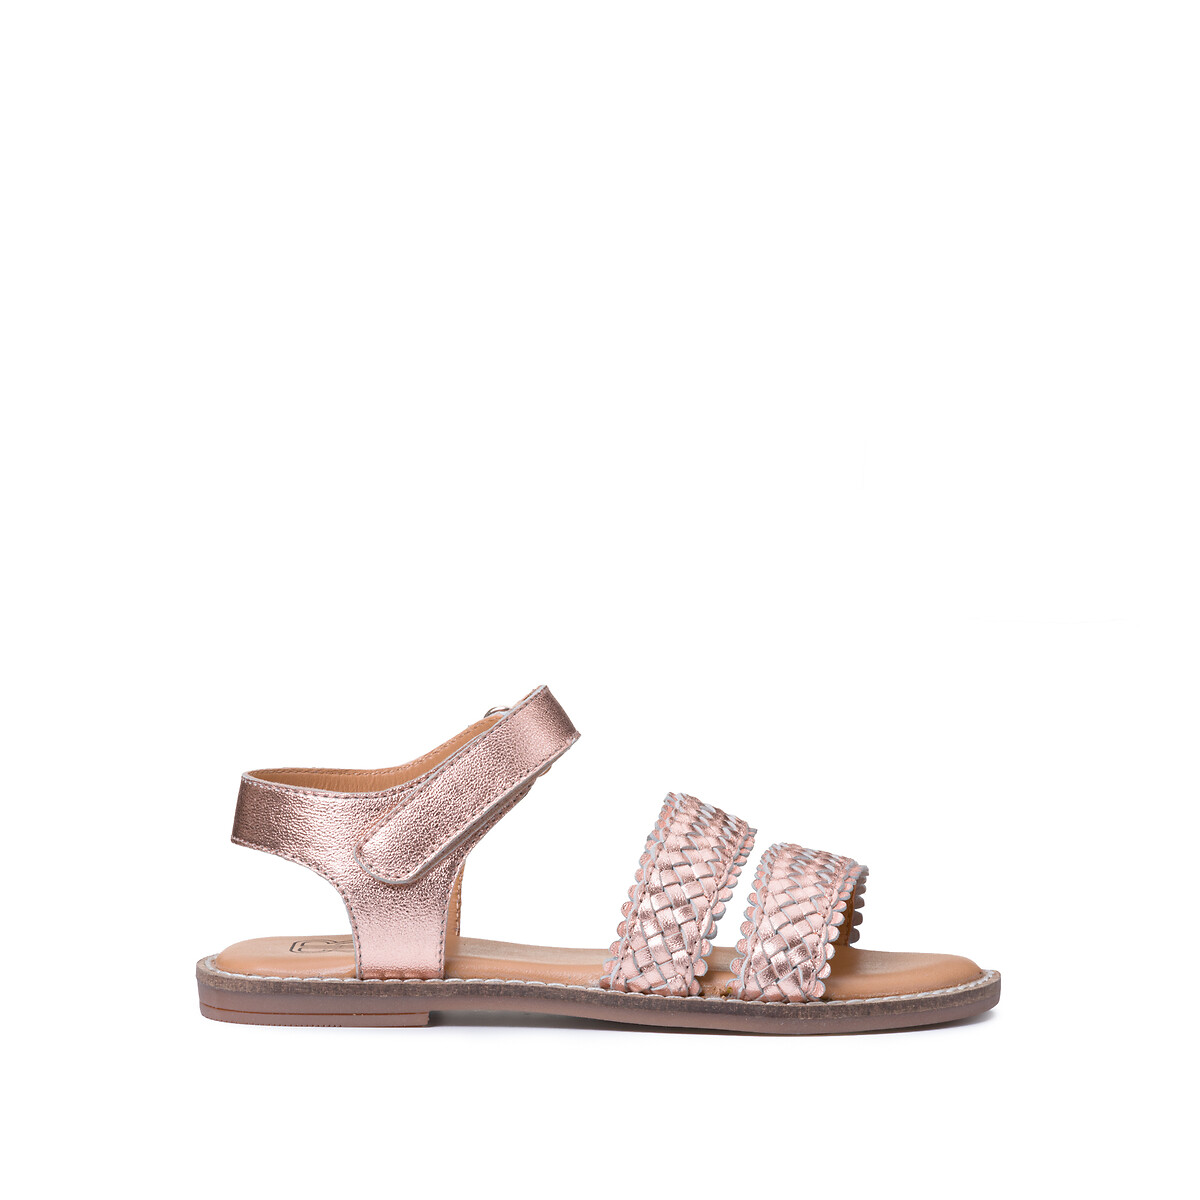 Kids leather sandals with touch 'n' close fastening pink La Collections |